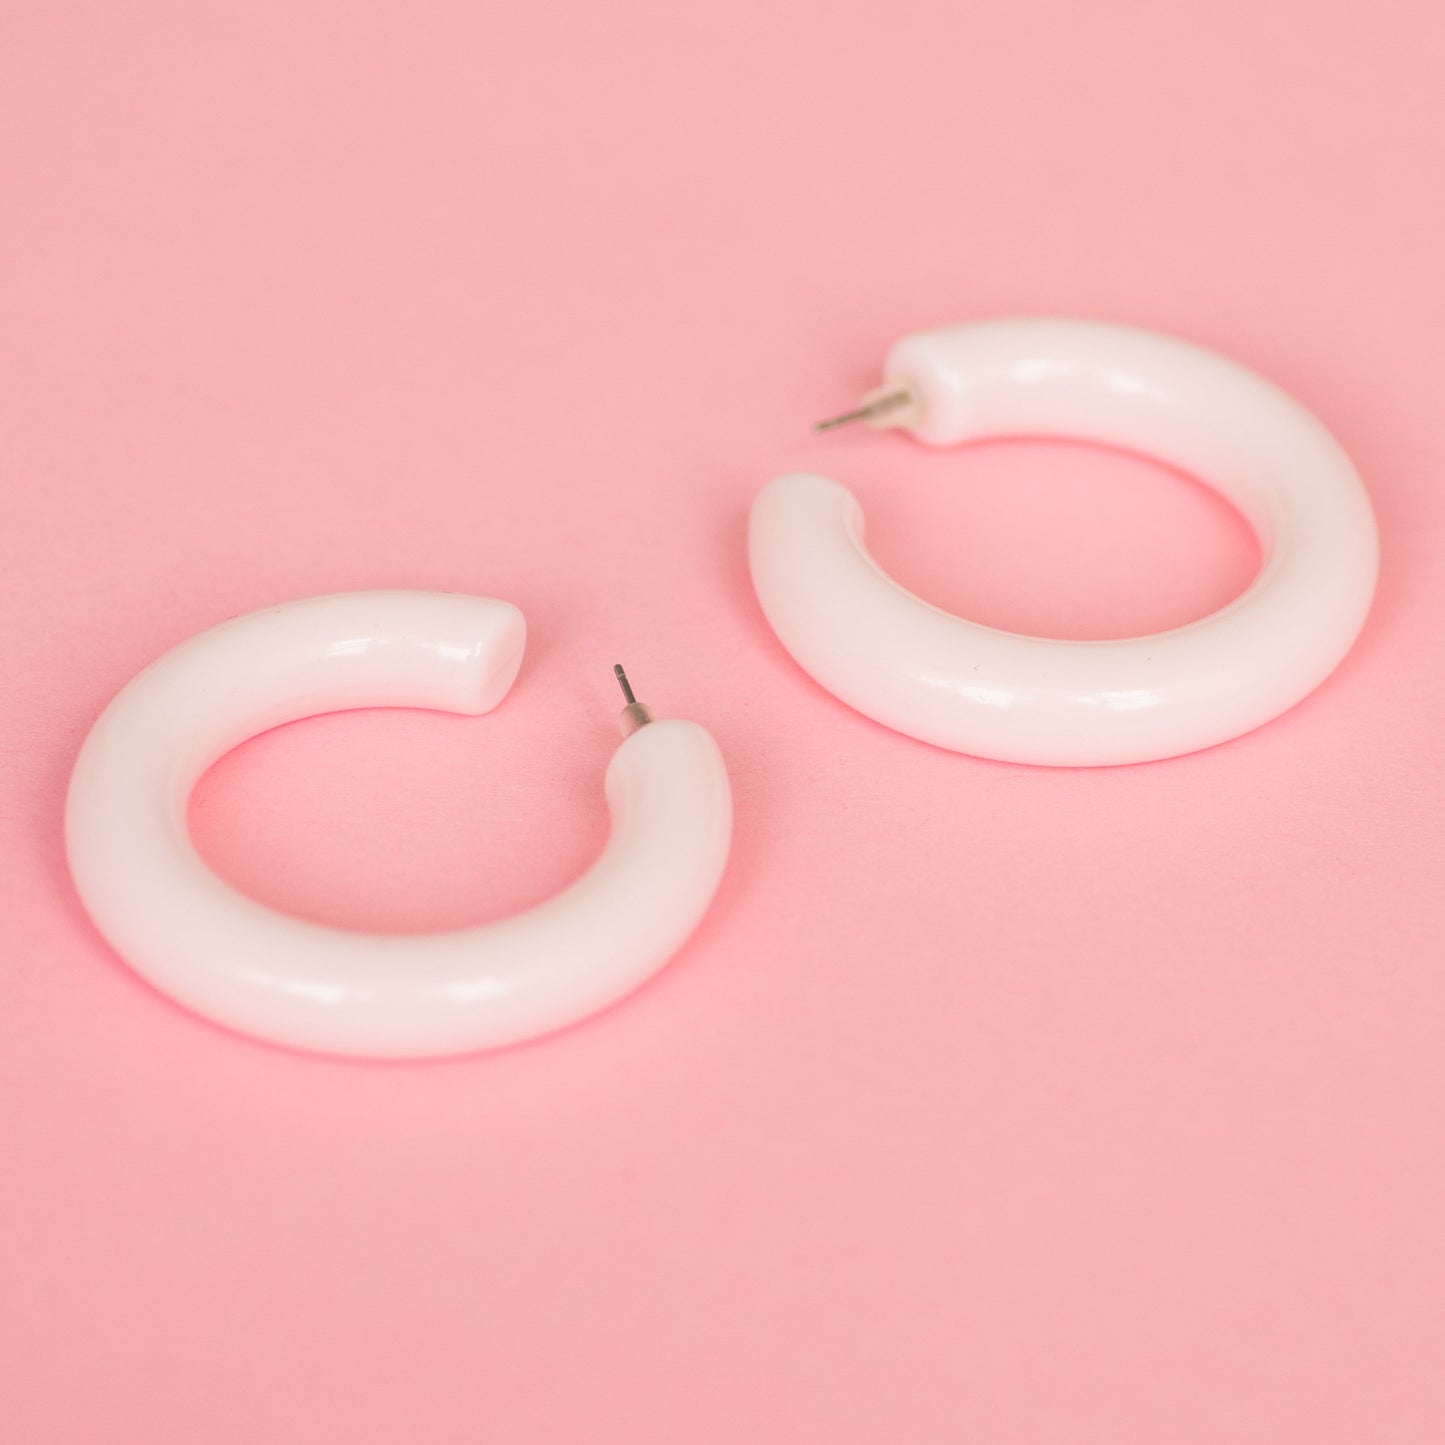 Soft Blush Chunky Hoop Earrings - Closed Caption | Shop Vintage + Handmade. Always Sustainable. Never Wasteful.